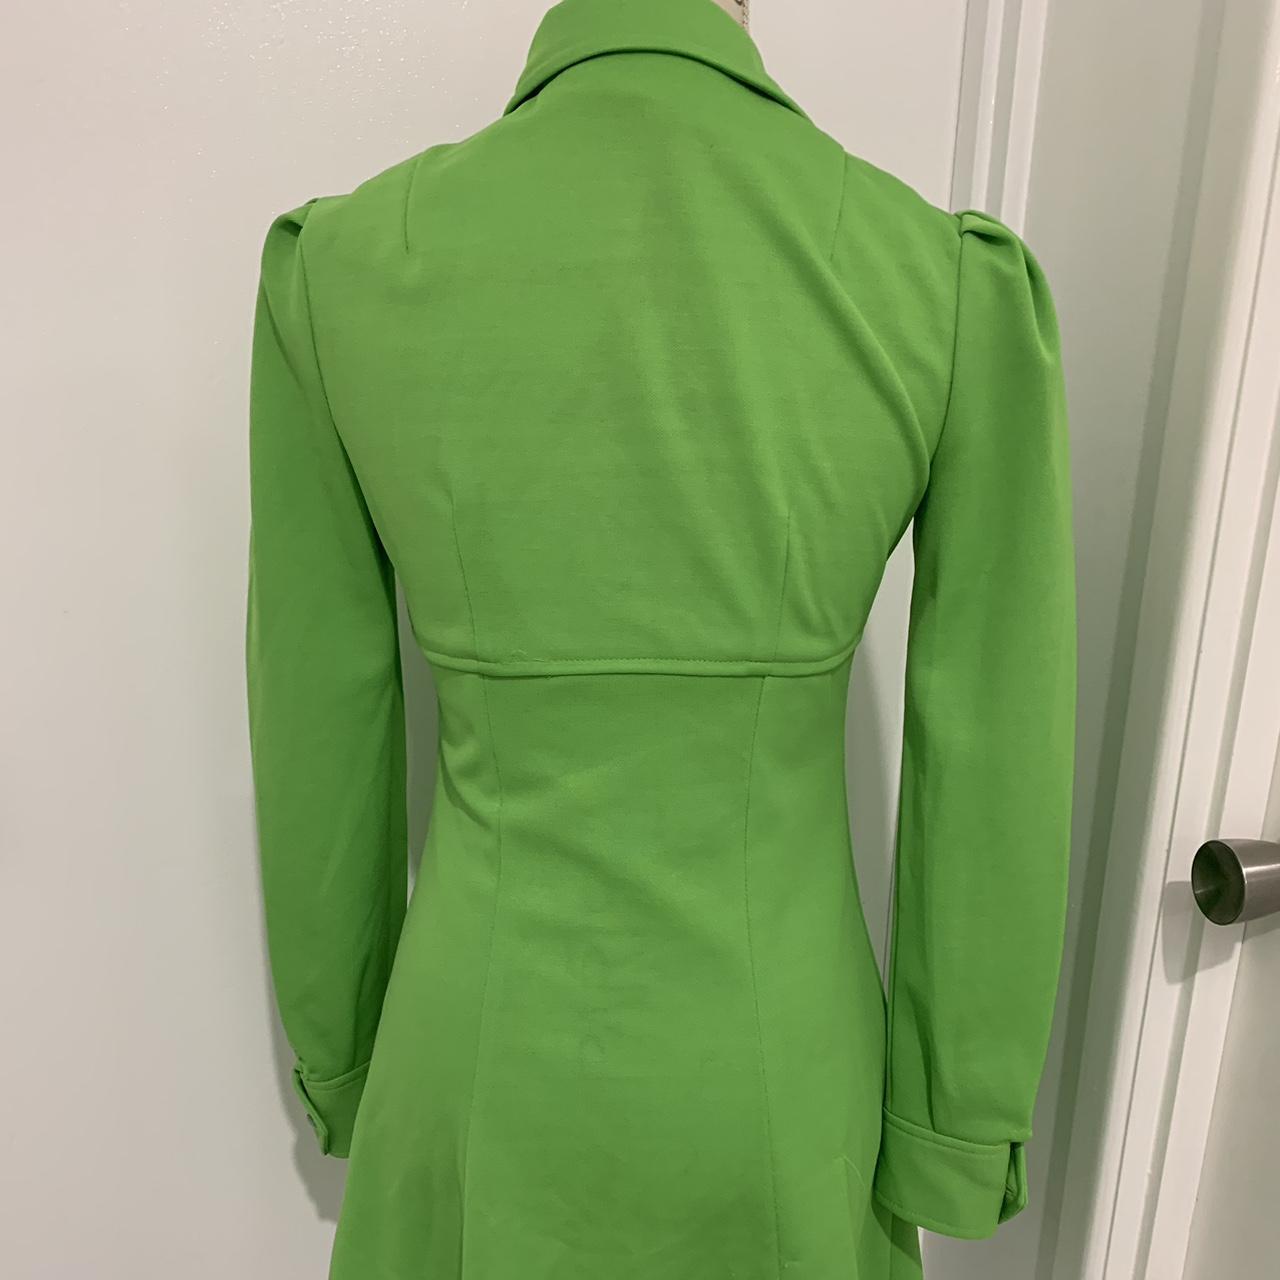 Cute-as-a-button Vintage 1960s Lime Green... - Depop